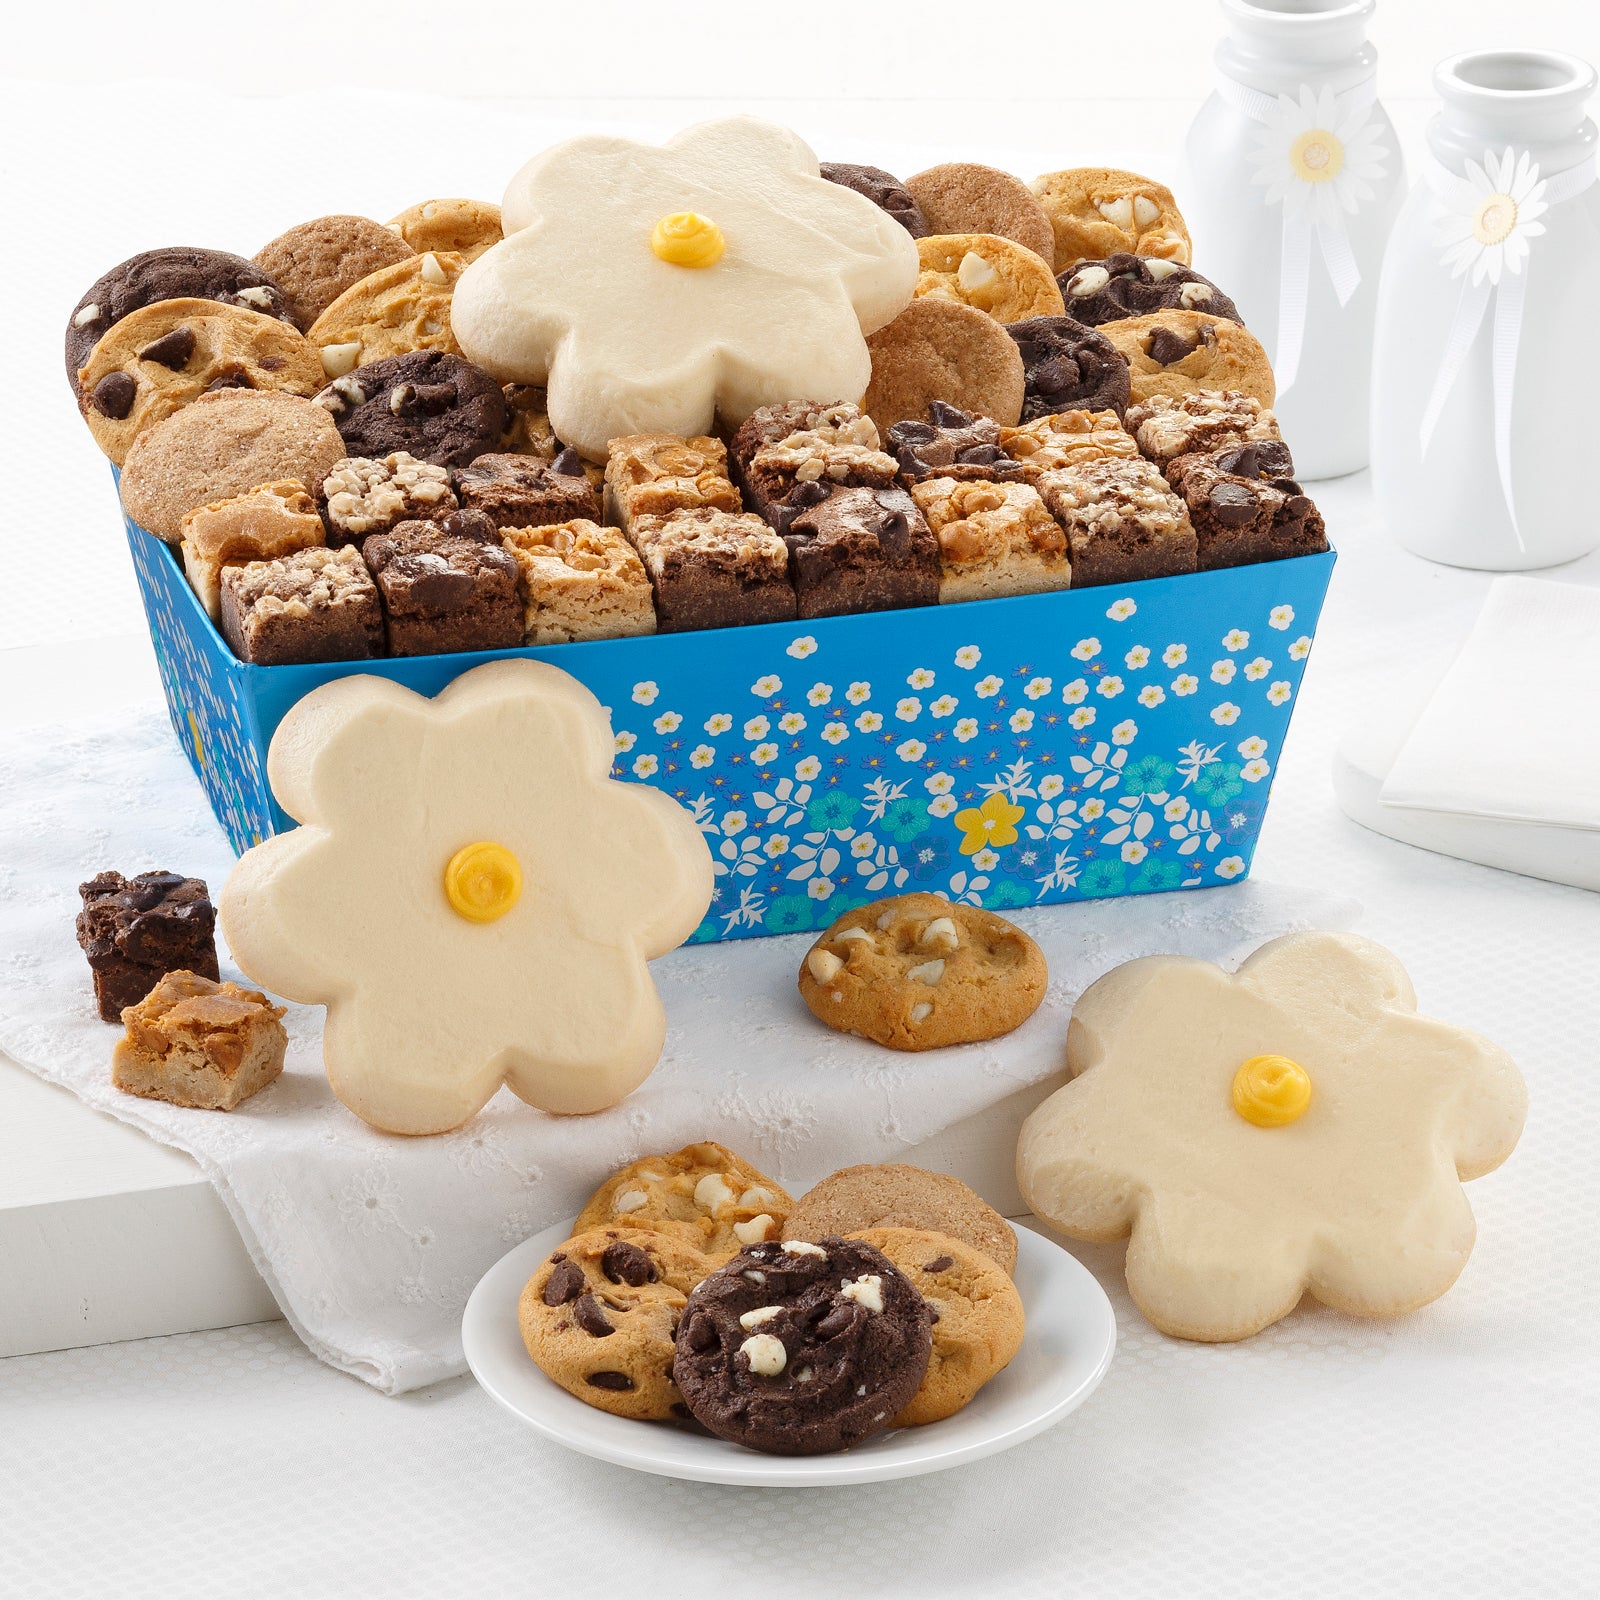 A blue floral gift crate filled with an assortment of nibblers, brownie bites, and frosted daisy cookies